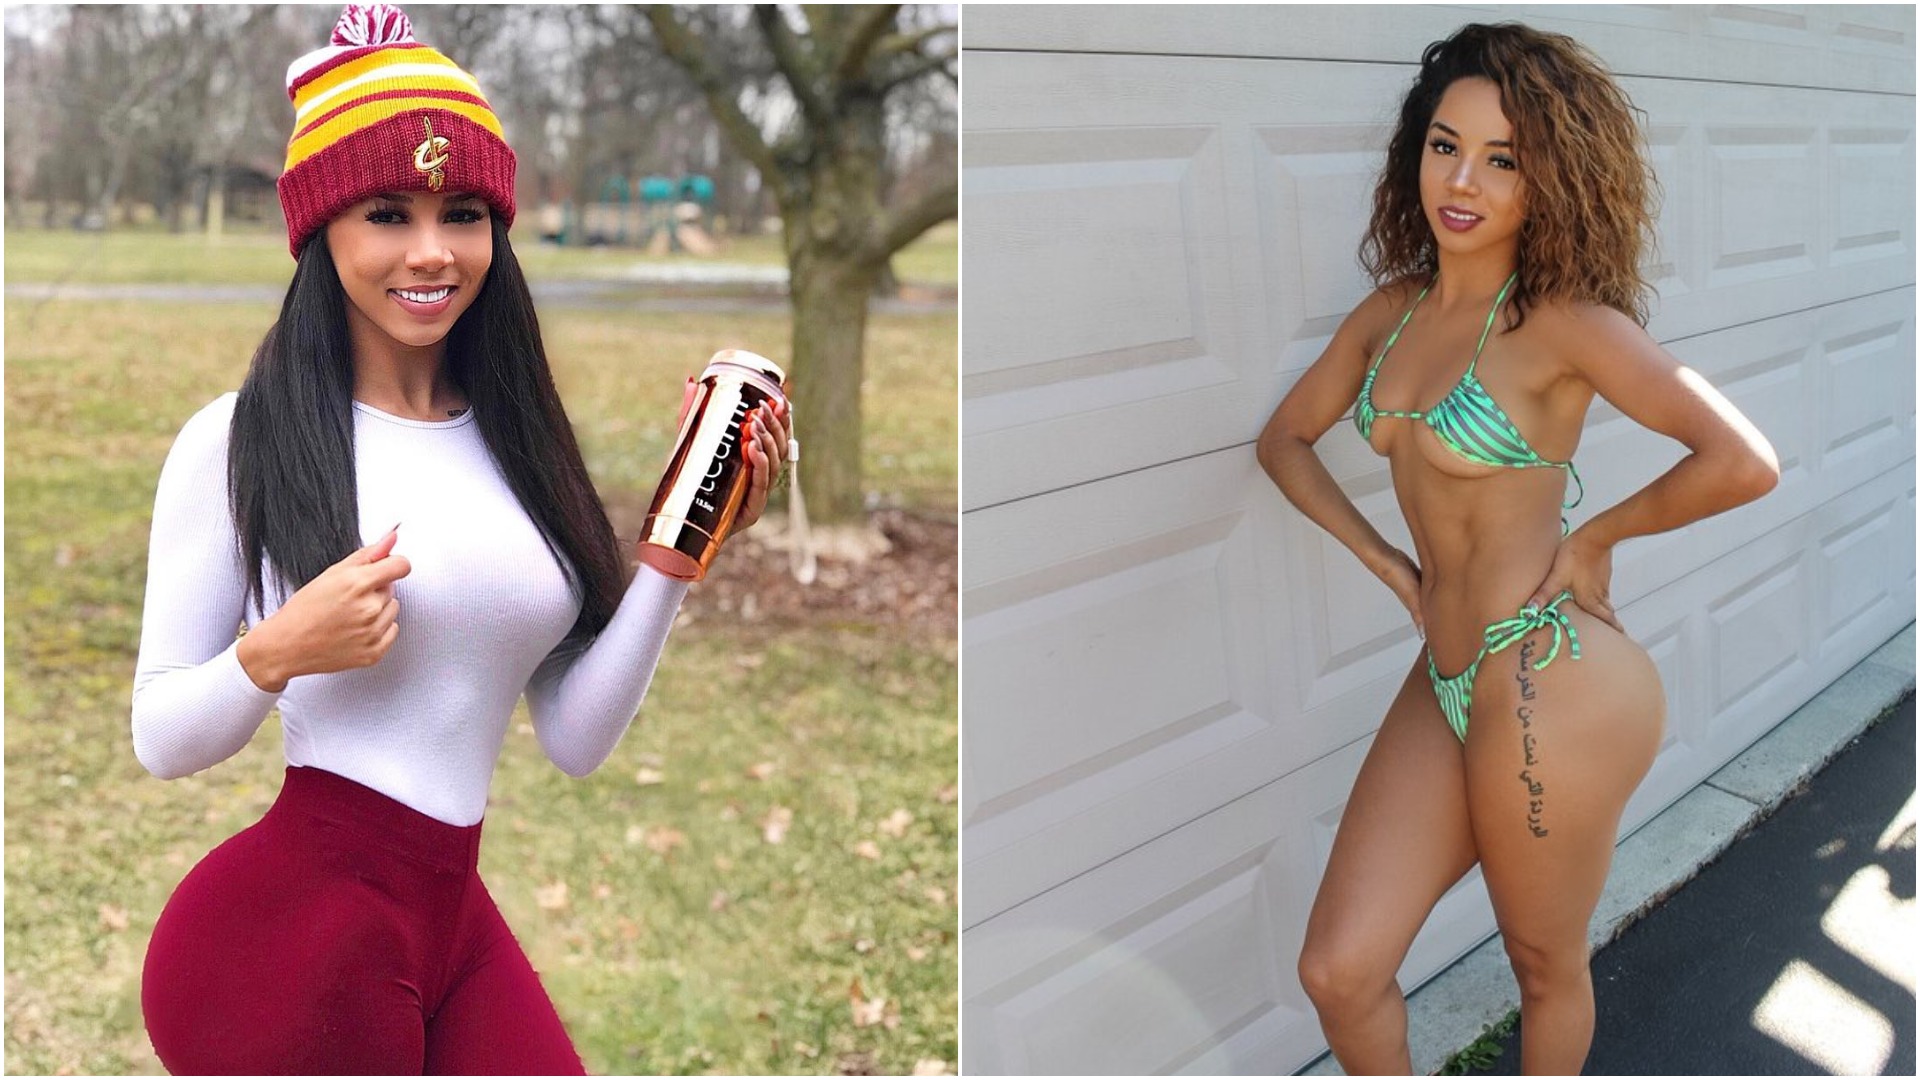 IG Model Brittany Renner Says Her Favorite Team Is Whatever 